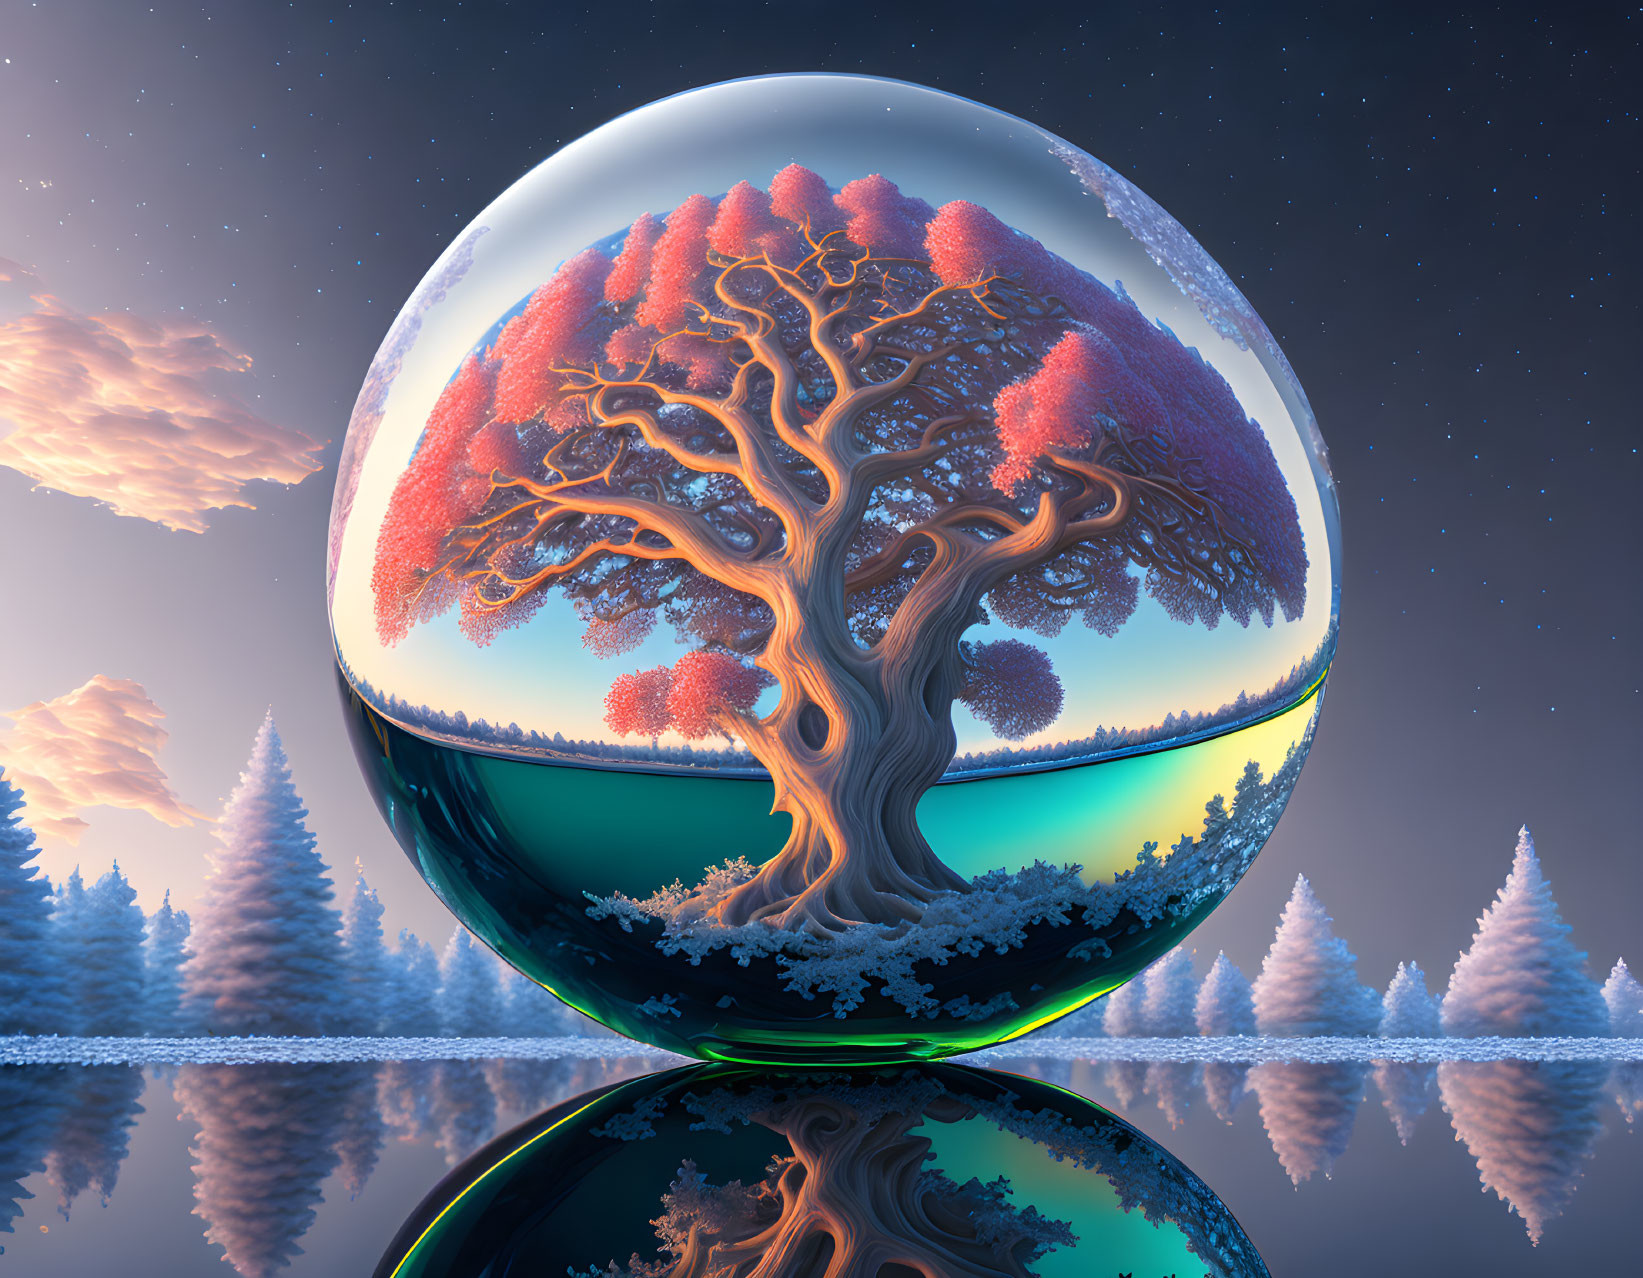 Vibrant tree in transparent sphere with snowy landscape reflection